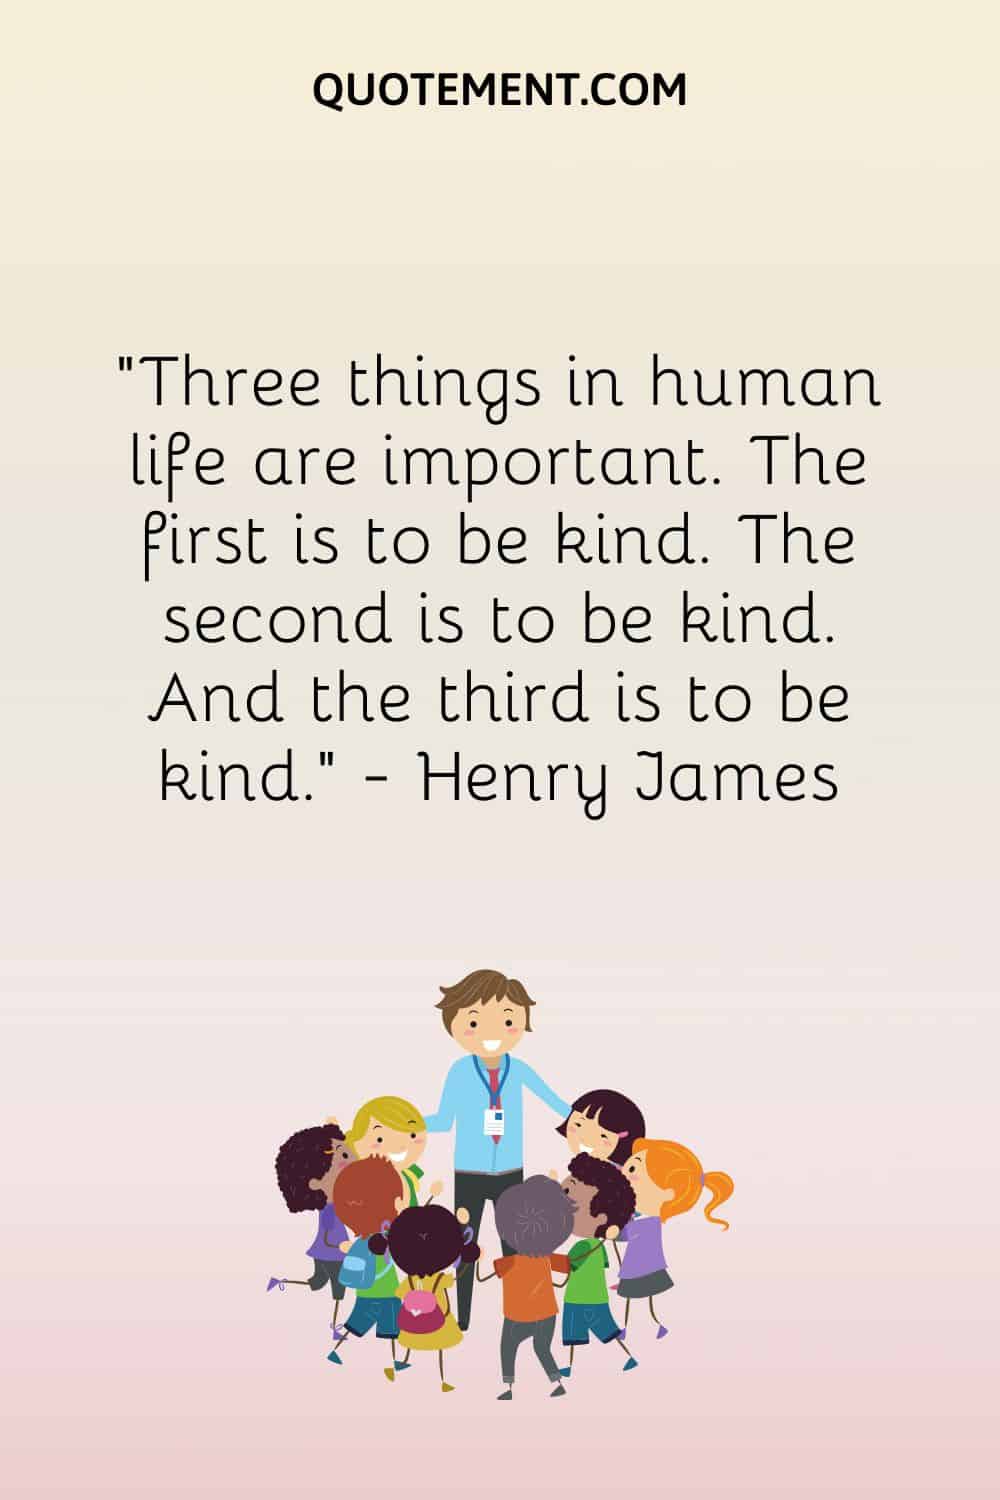 Three things in human life are important. The first is to be kind. The second is to be kind. And the third is to be kind